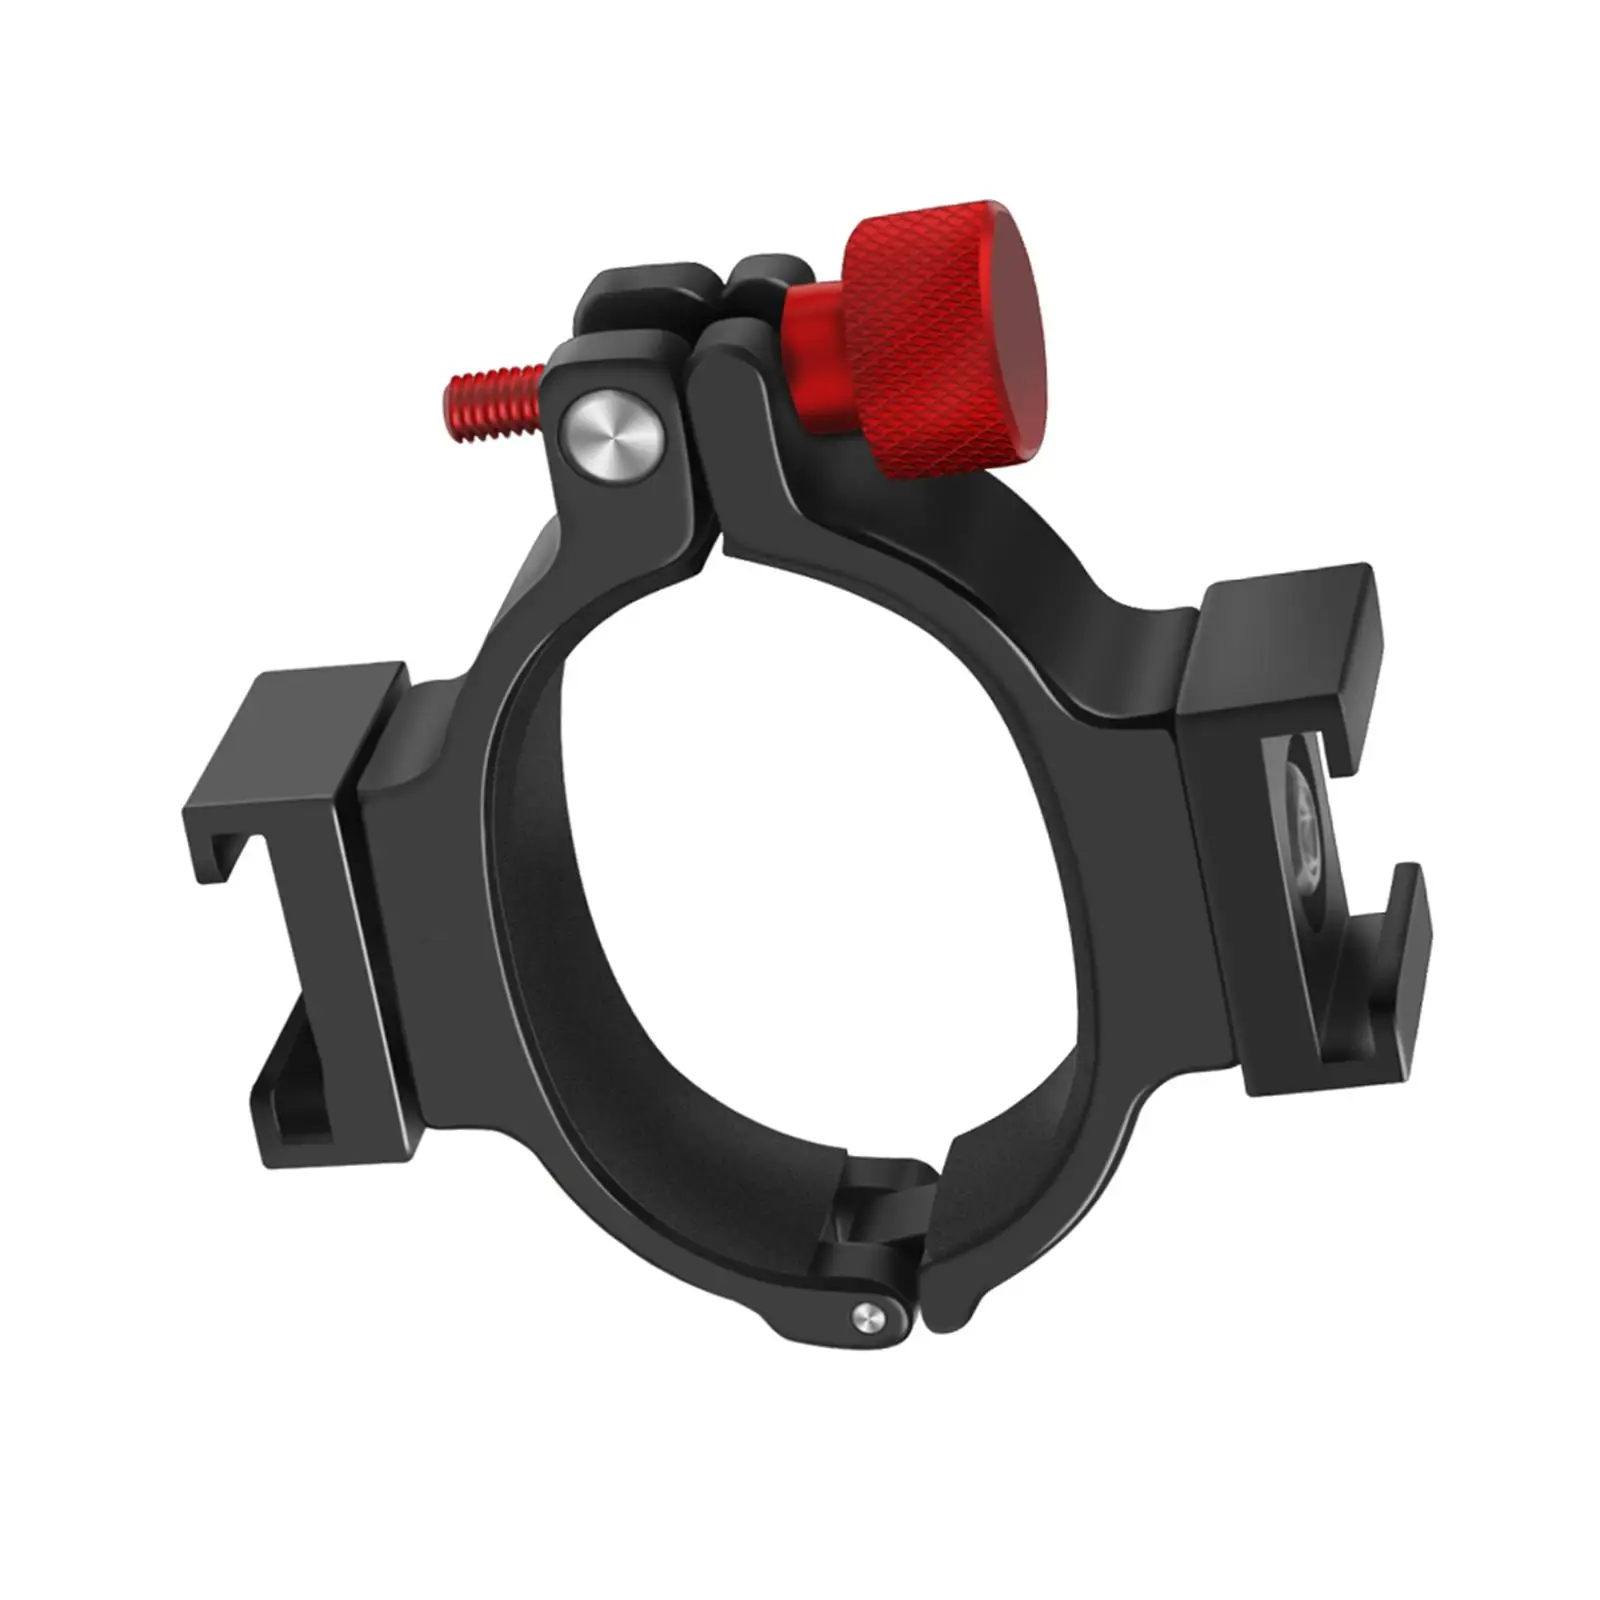 Extension Adaptor Rack Stabilizer Bracket 360 Degrees Rotation Fixing Thread Hole Adjustable The Shoe Mount for Audio Osmo2/3/4